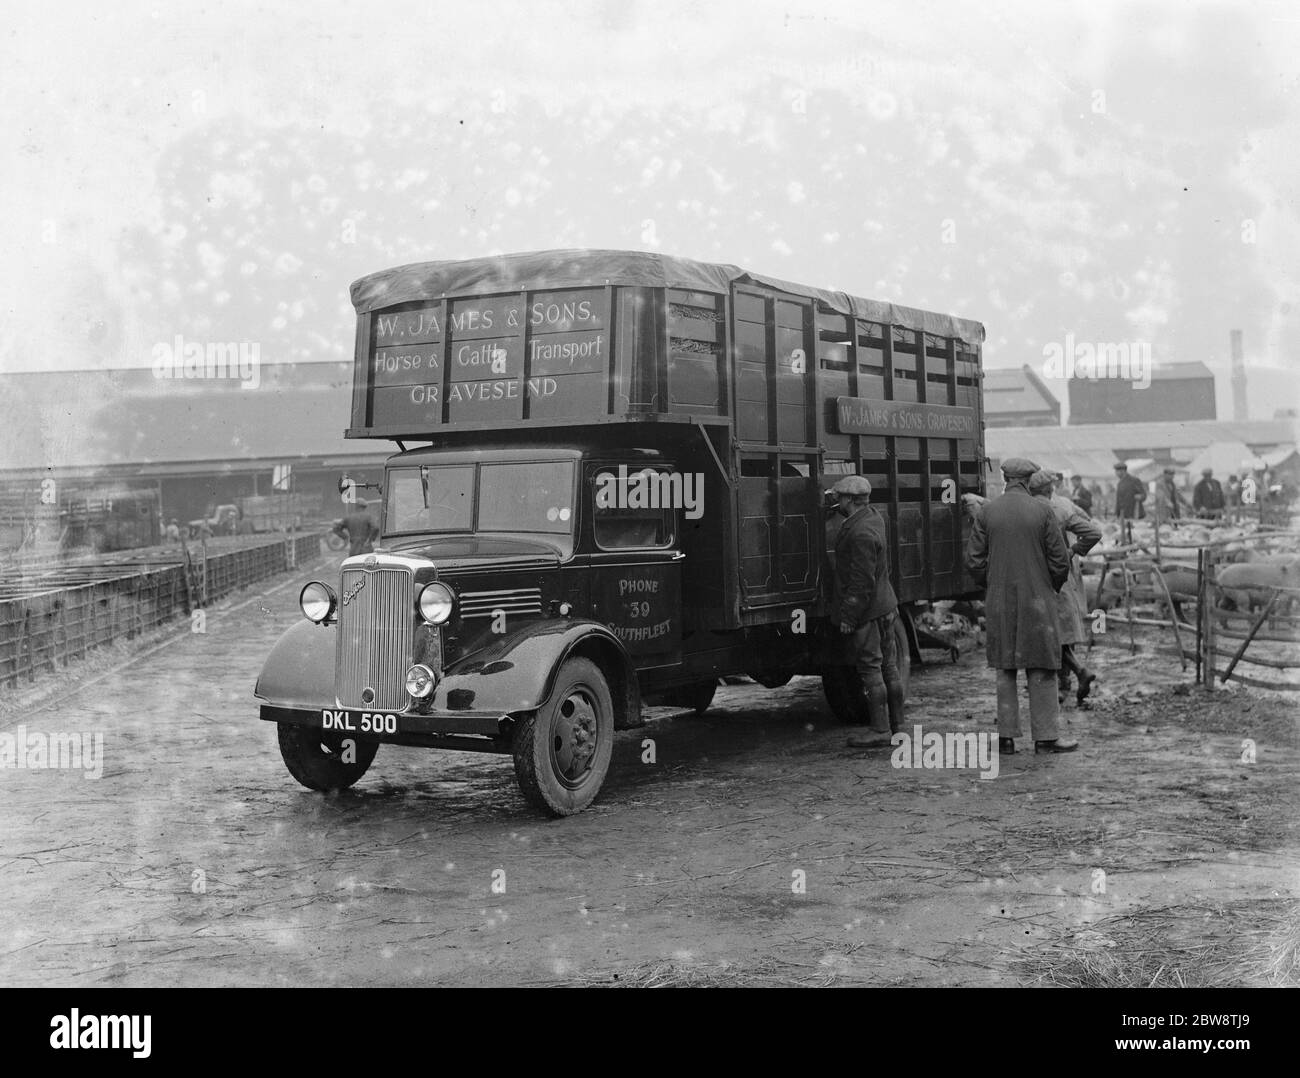 Sheep are being loaded up onto a Bedford lorry belonging to W James & Sons Horse and Cattle Transport from Gravesend , Kent . They are being taken to the sheep sale in Maidstone . 1936 Stock Photo